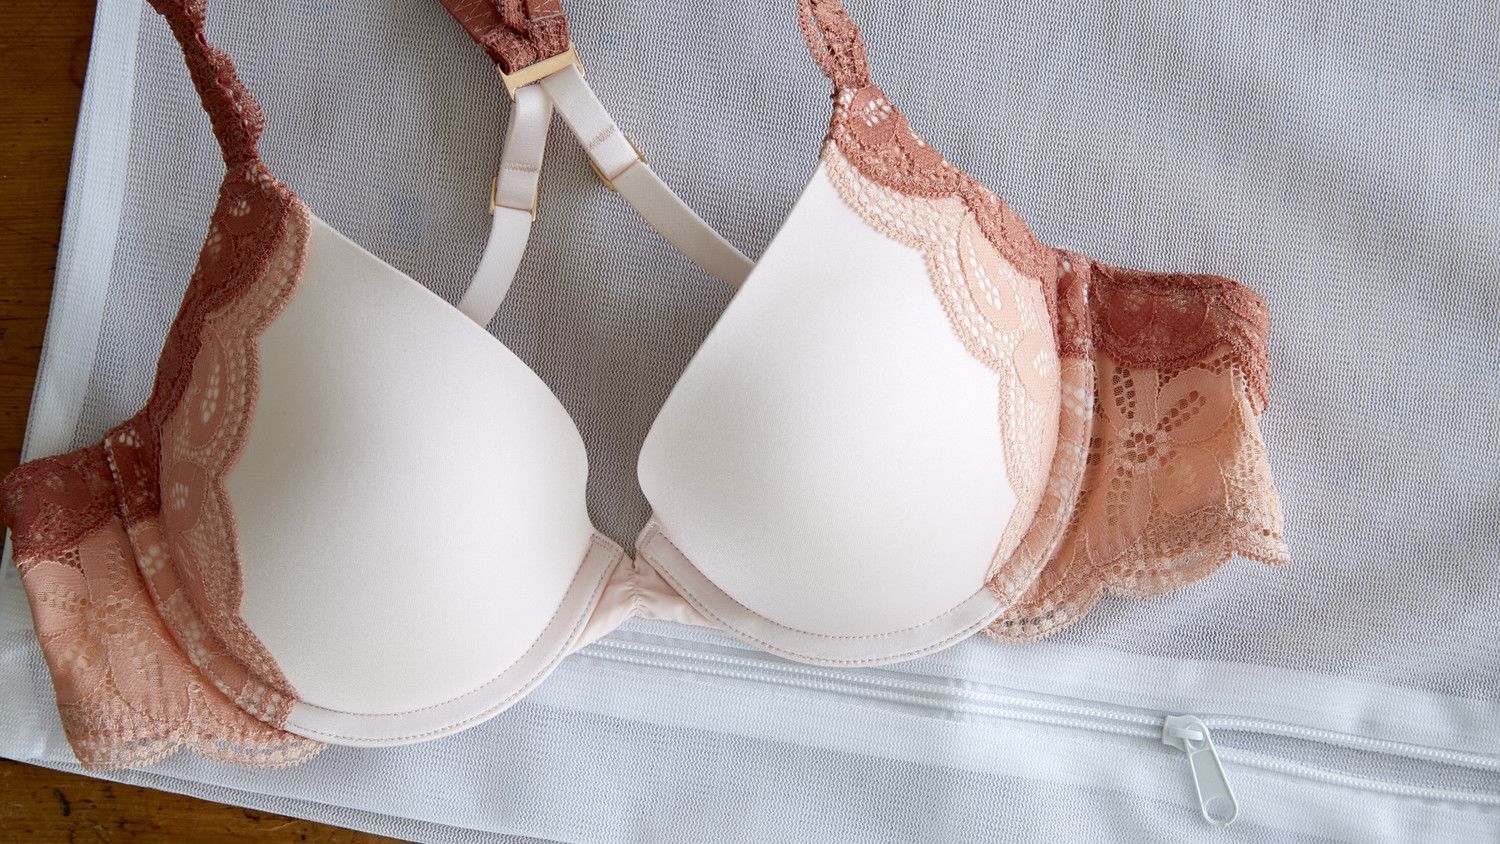 5 Mistakes When Washing Bras To Avoid